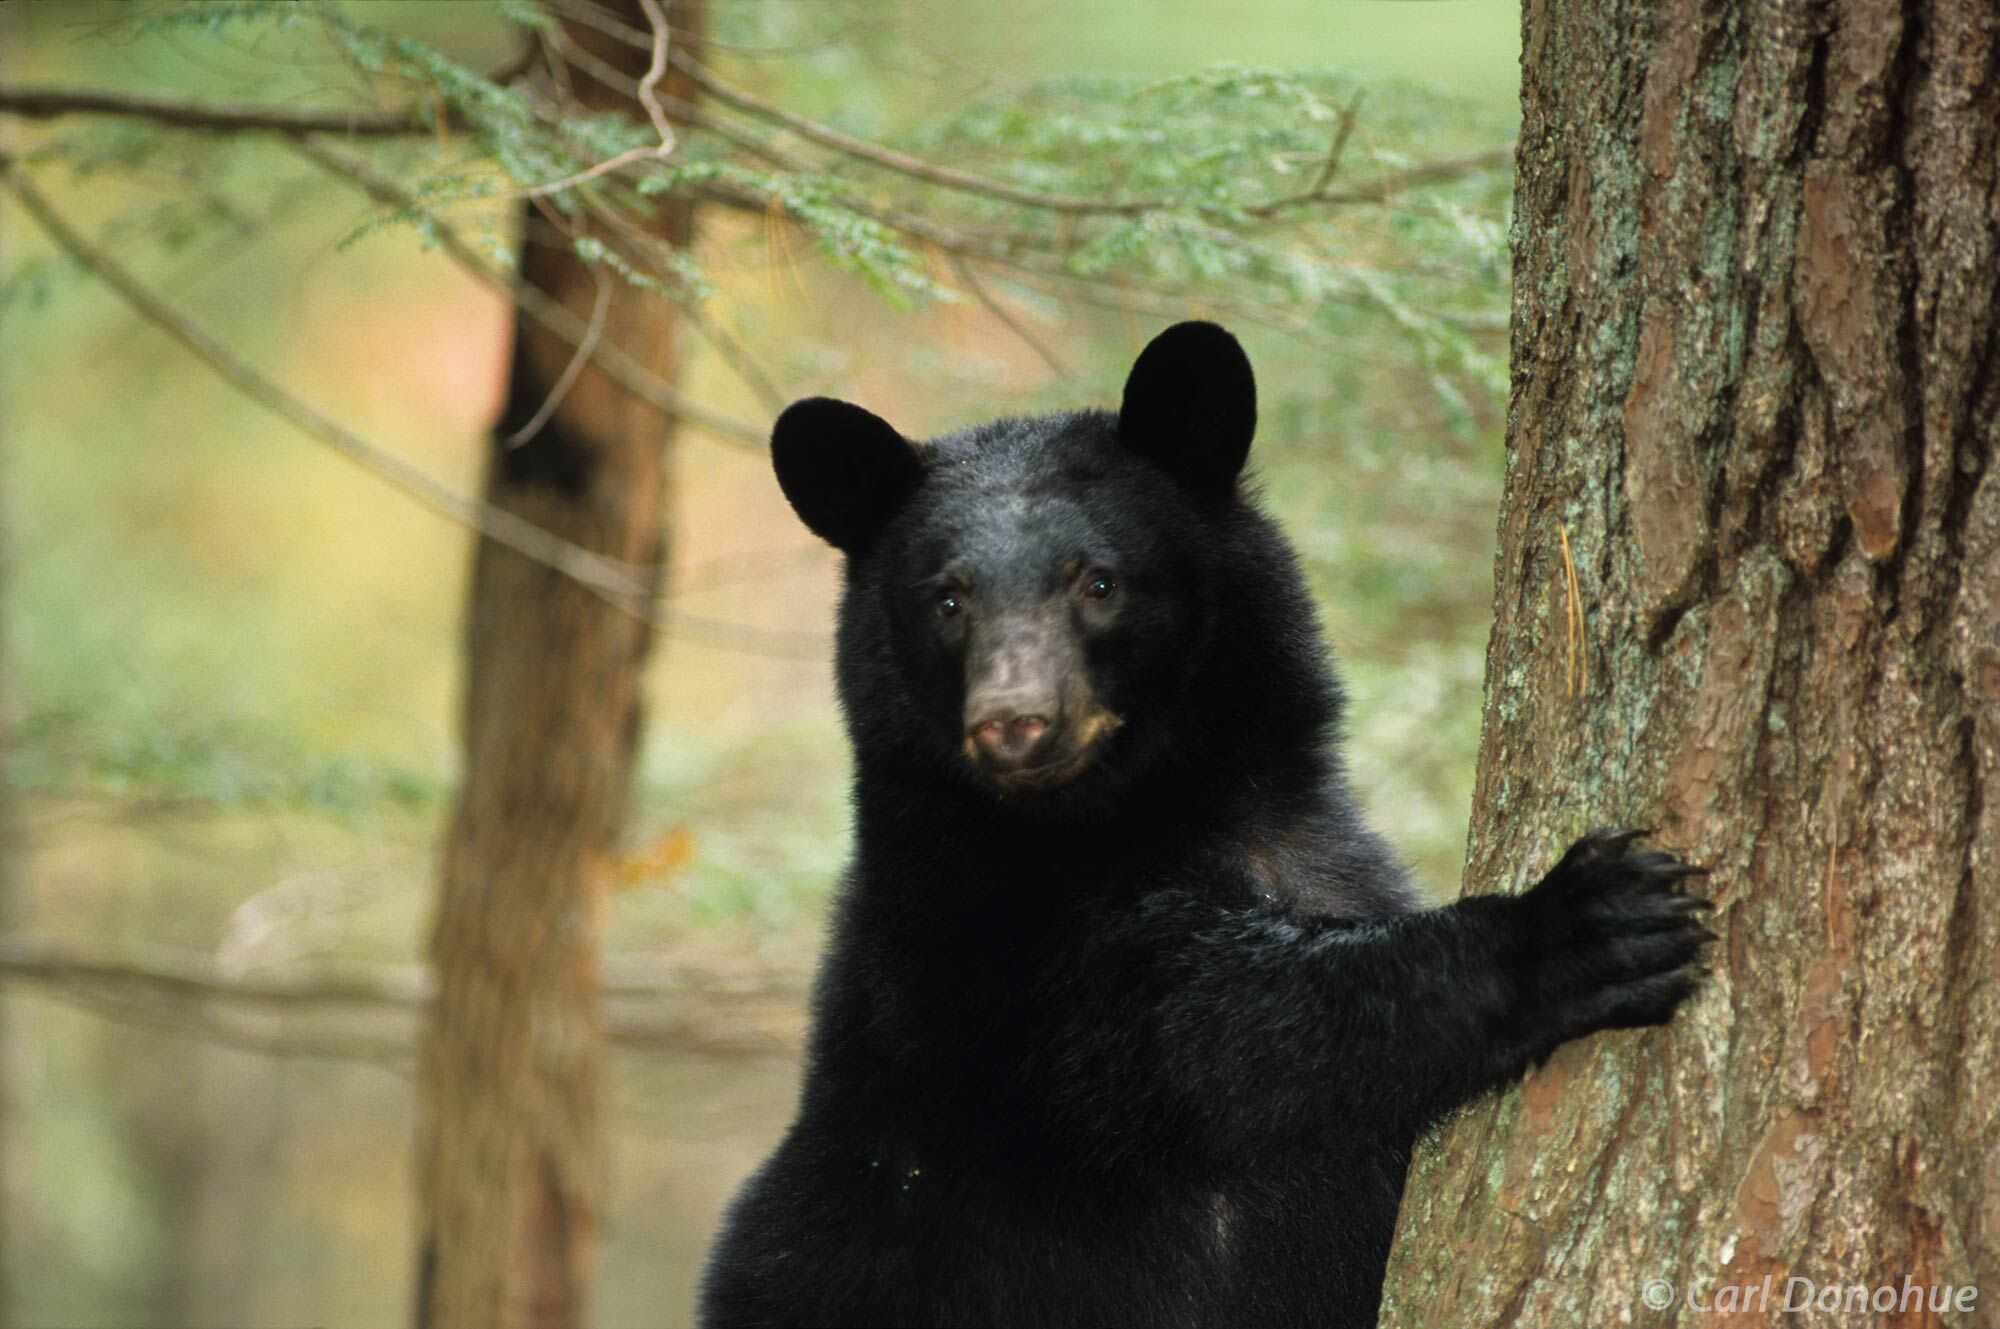 Black bear cub hugs a tree in the forest, Cades Cove, Great Smoky Mountains National Park, Tennessee.